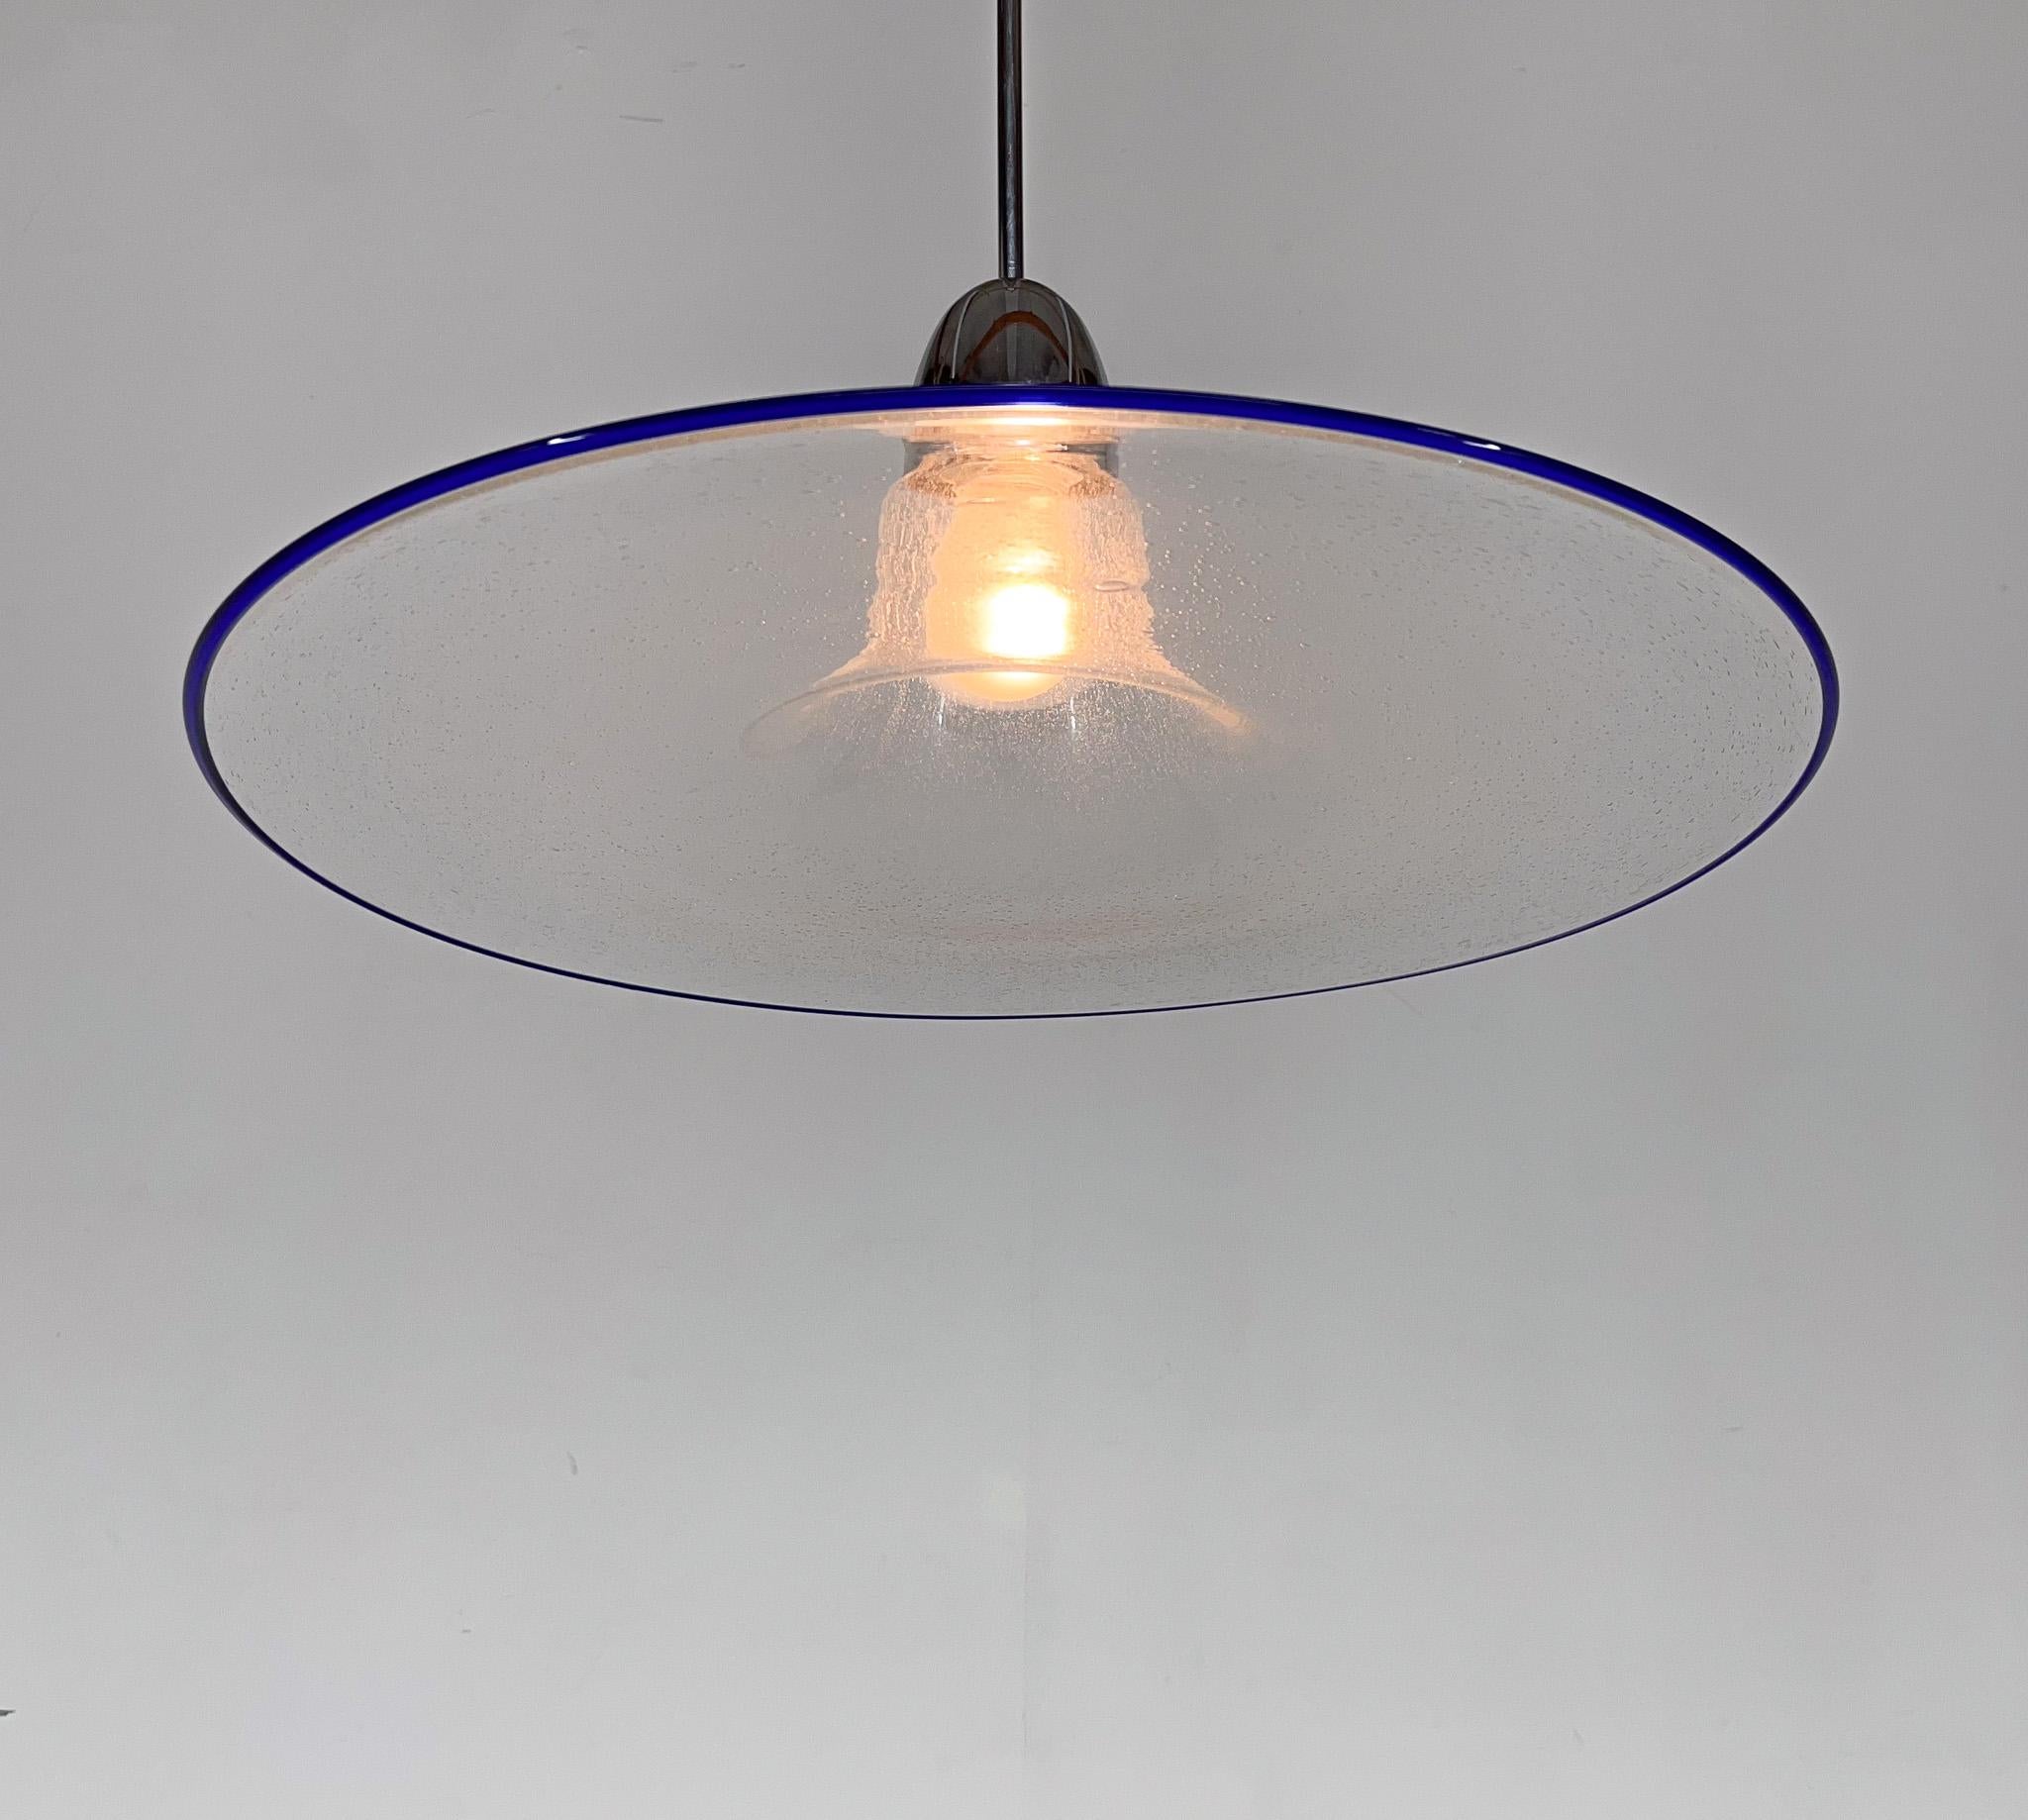 Vintage bubble clear glass pendant light with blue rim.  Made in Italy in the 1970's. New wiring.